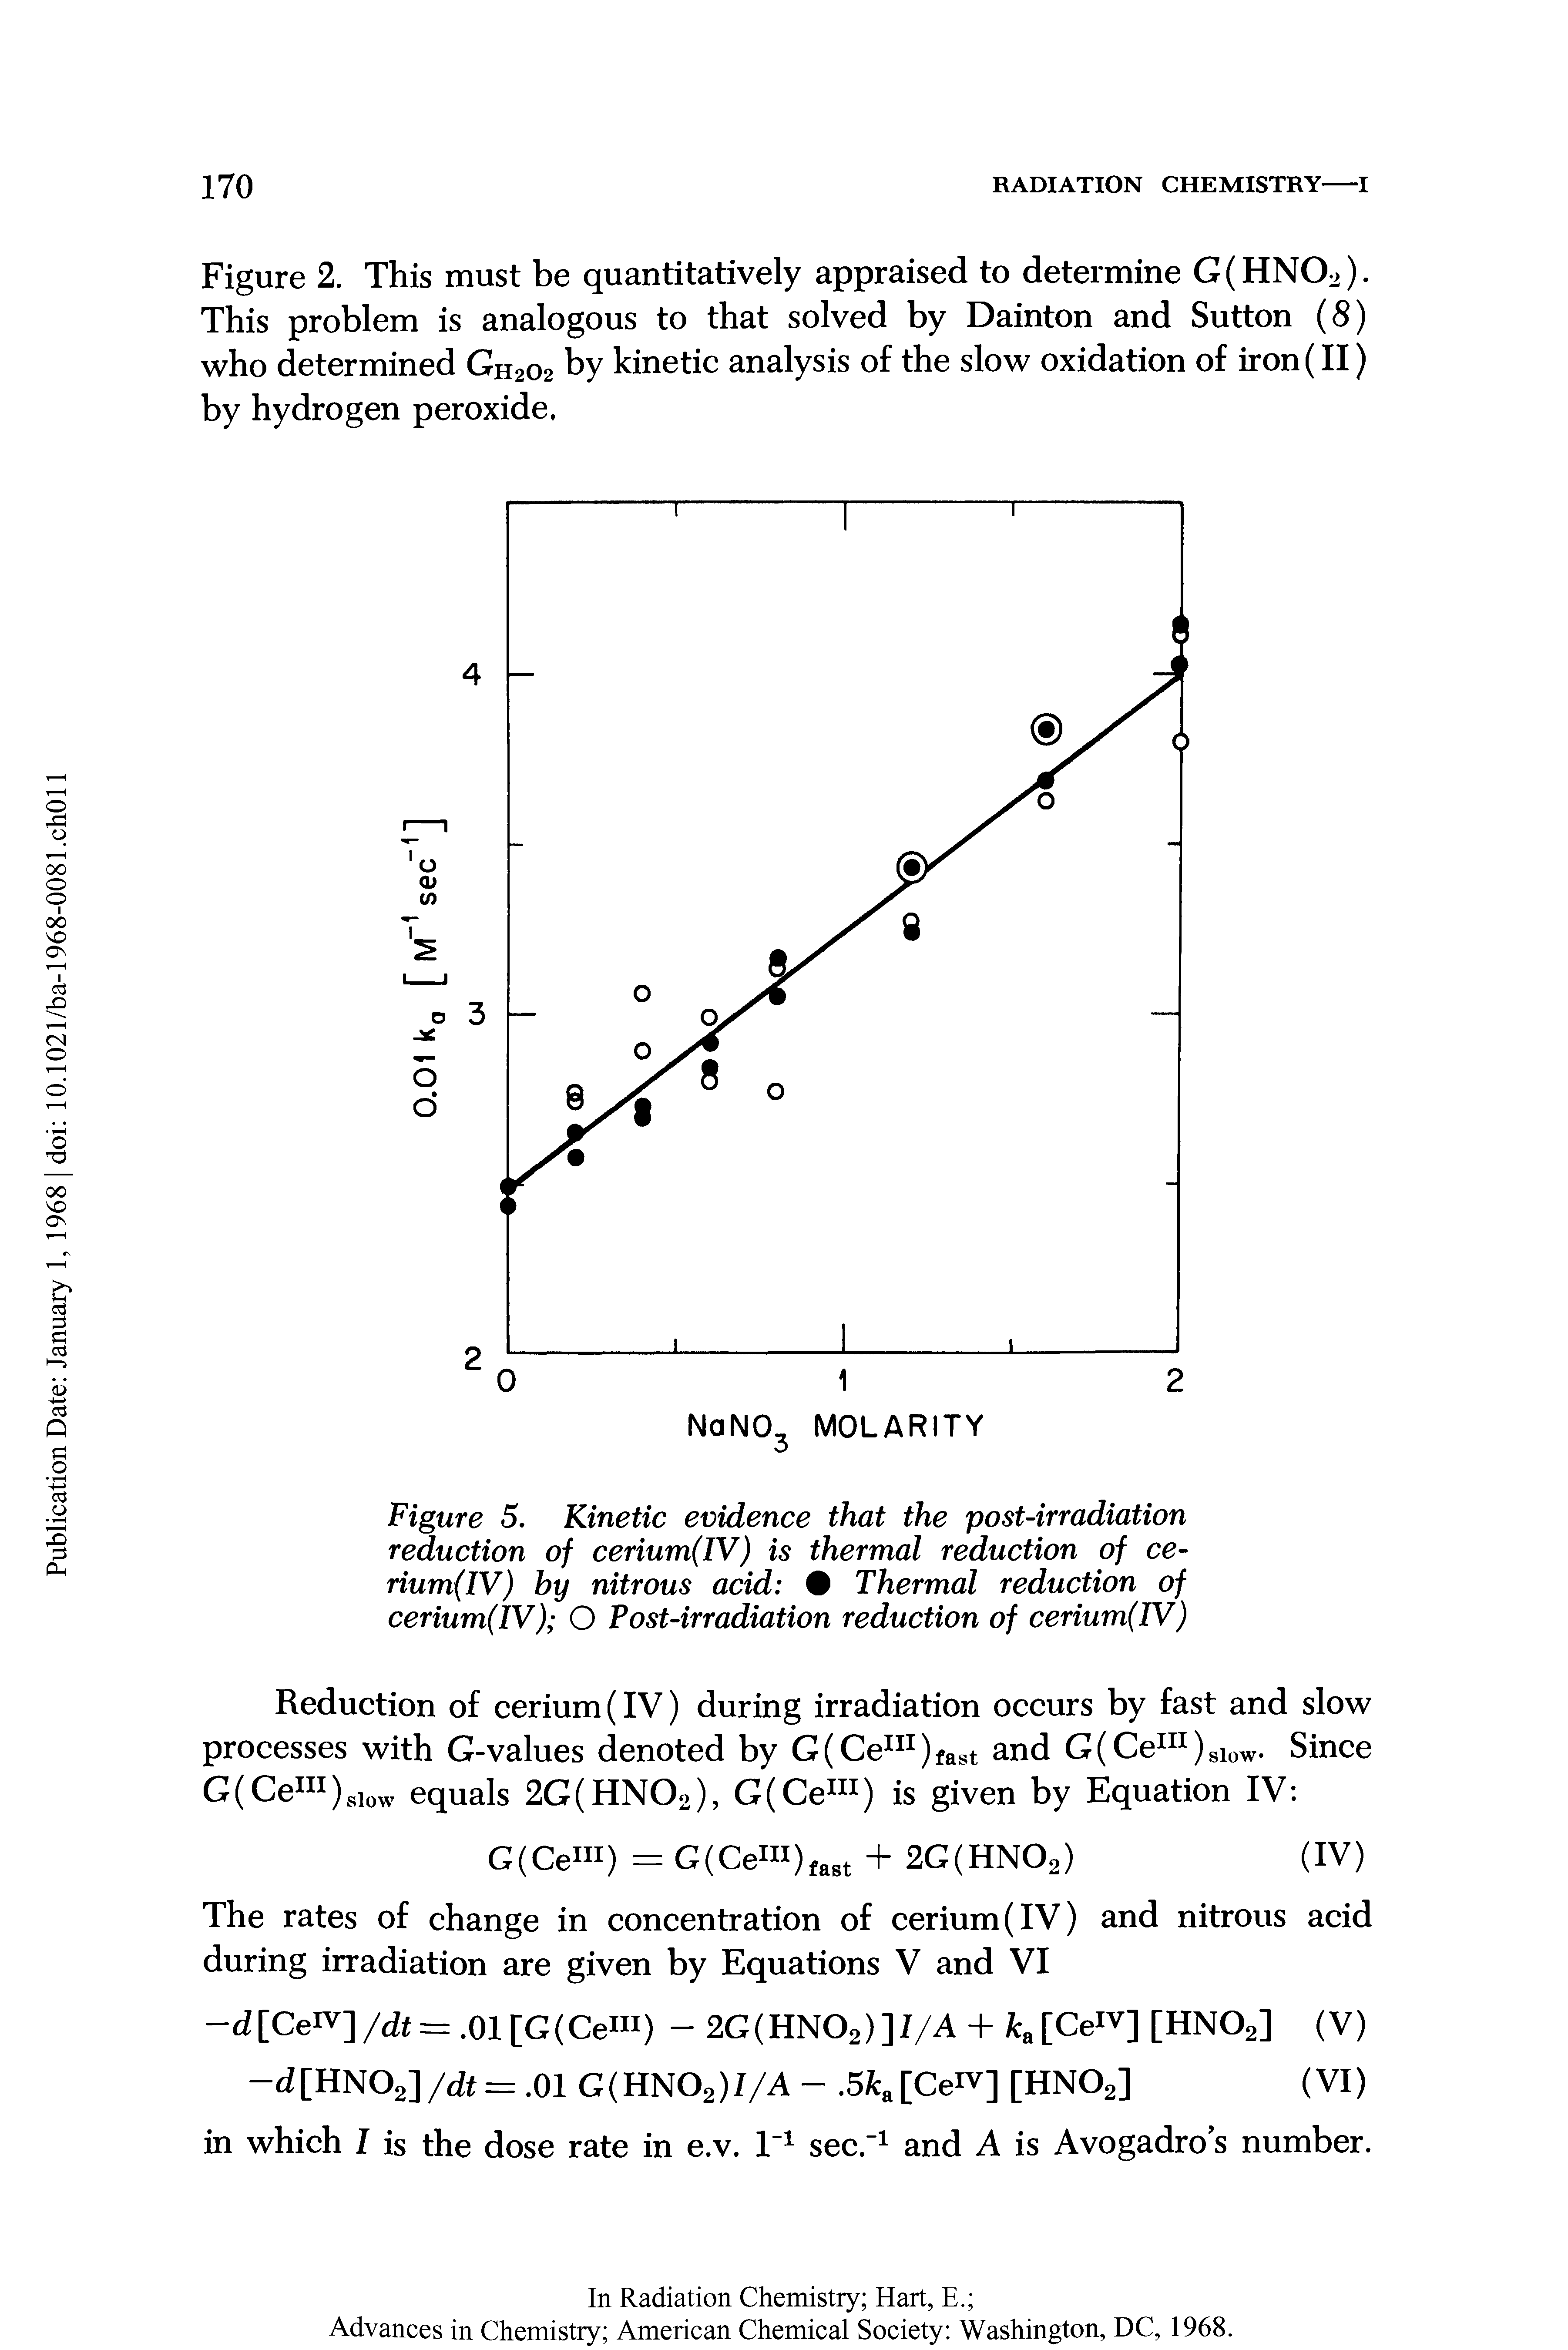 Figure 5. Kinetic evidence that the post-irradiation reduction of cerium(IV) is thermal reduction of ce-rium(IV) by nitrous acid Thermal reduction of cerium(IV) O Post-irradiation reduction of cerium(IV)...